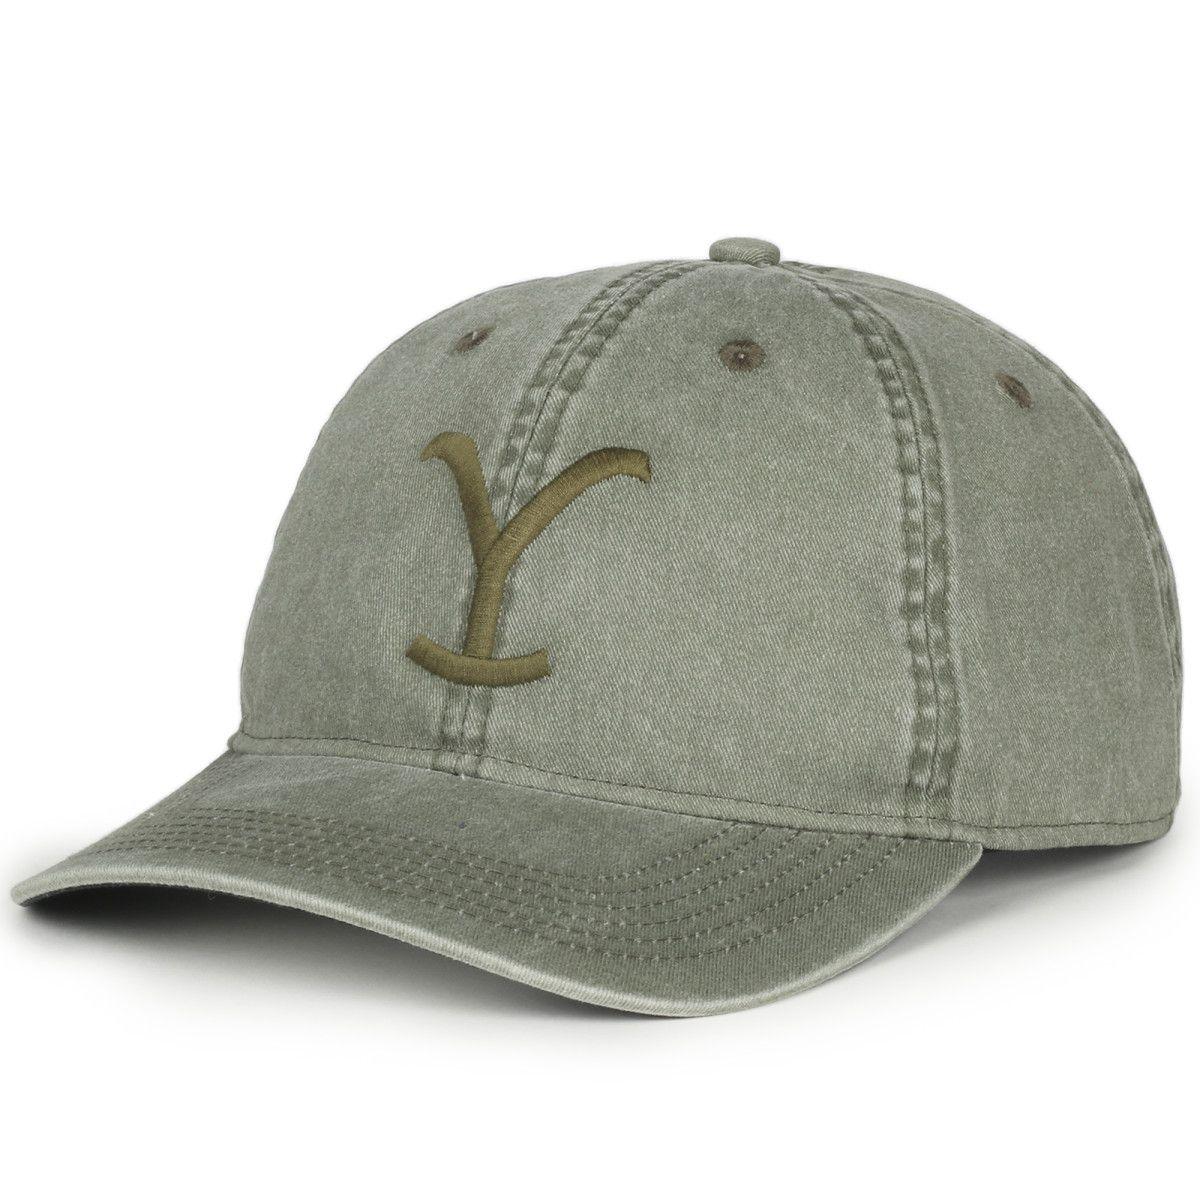 Wrangler X Yellowstone Stitched Cap - Leapfrog Outdoor Sports and Apparel